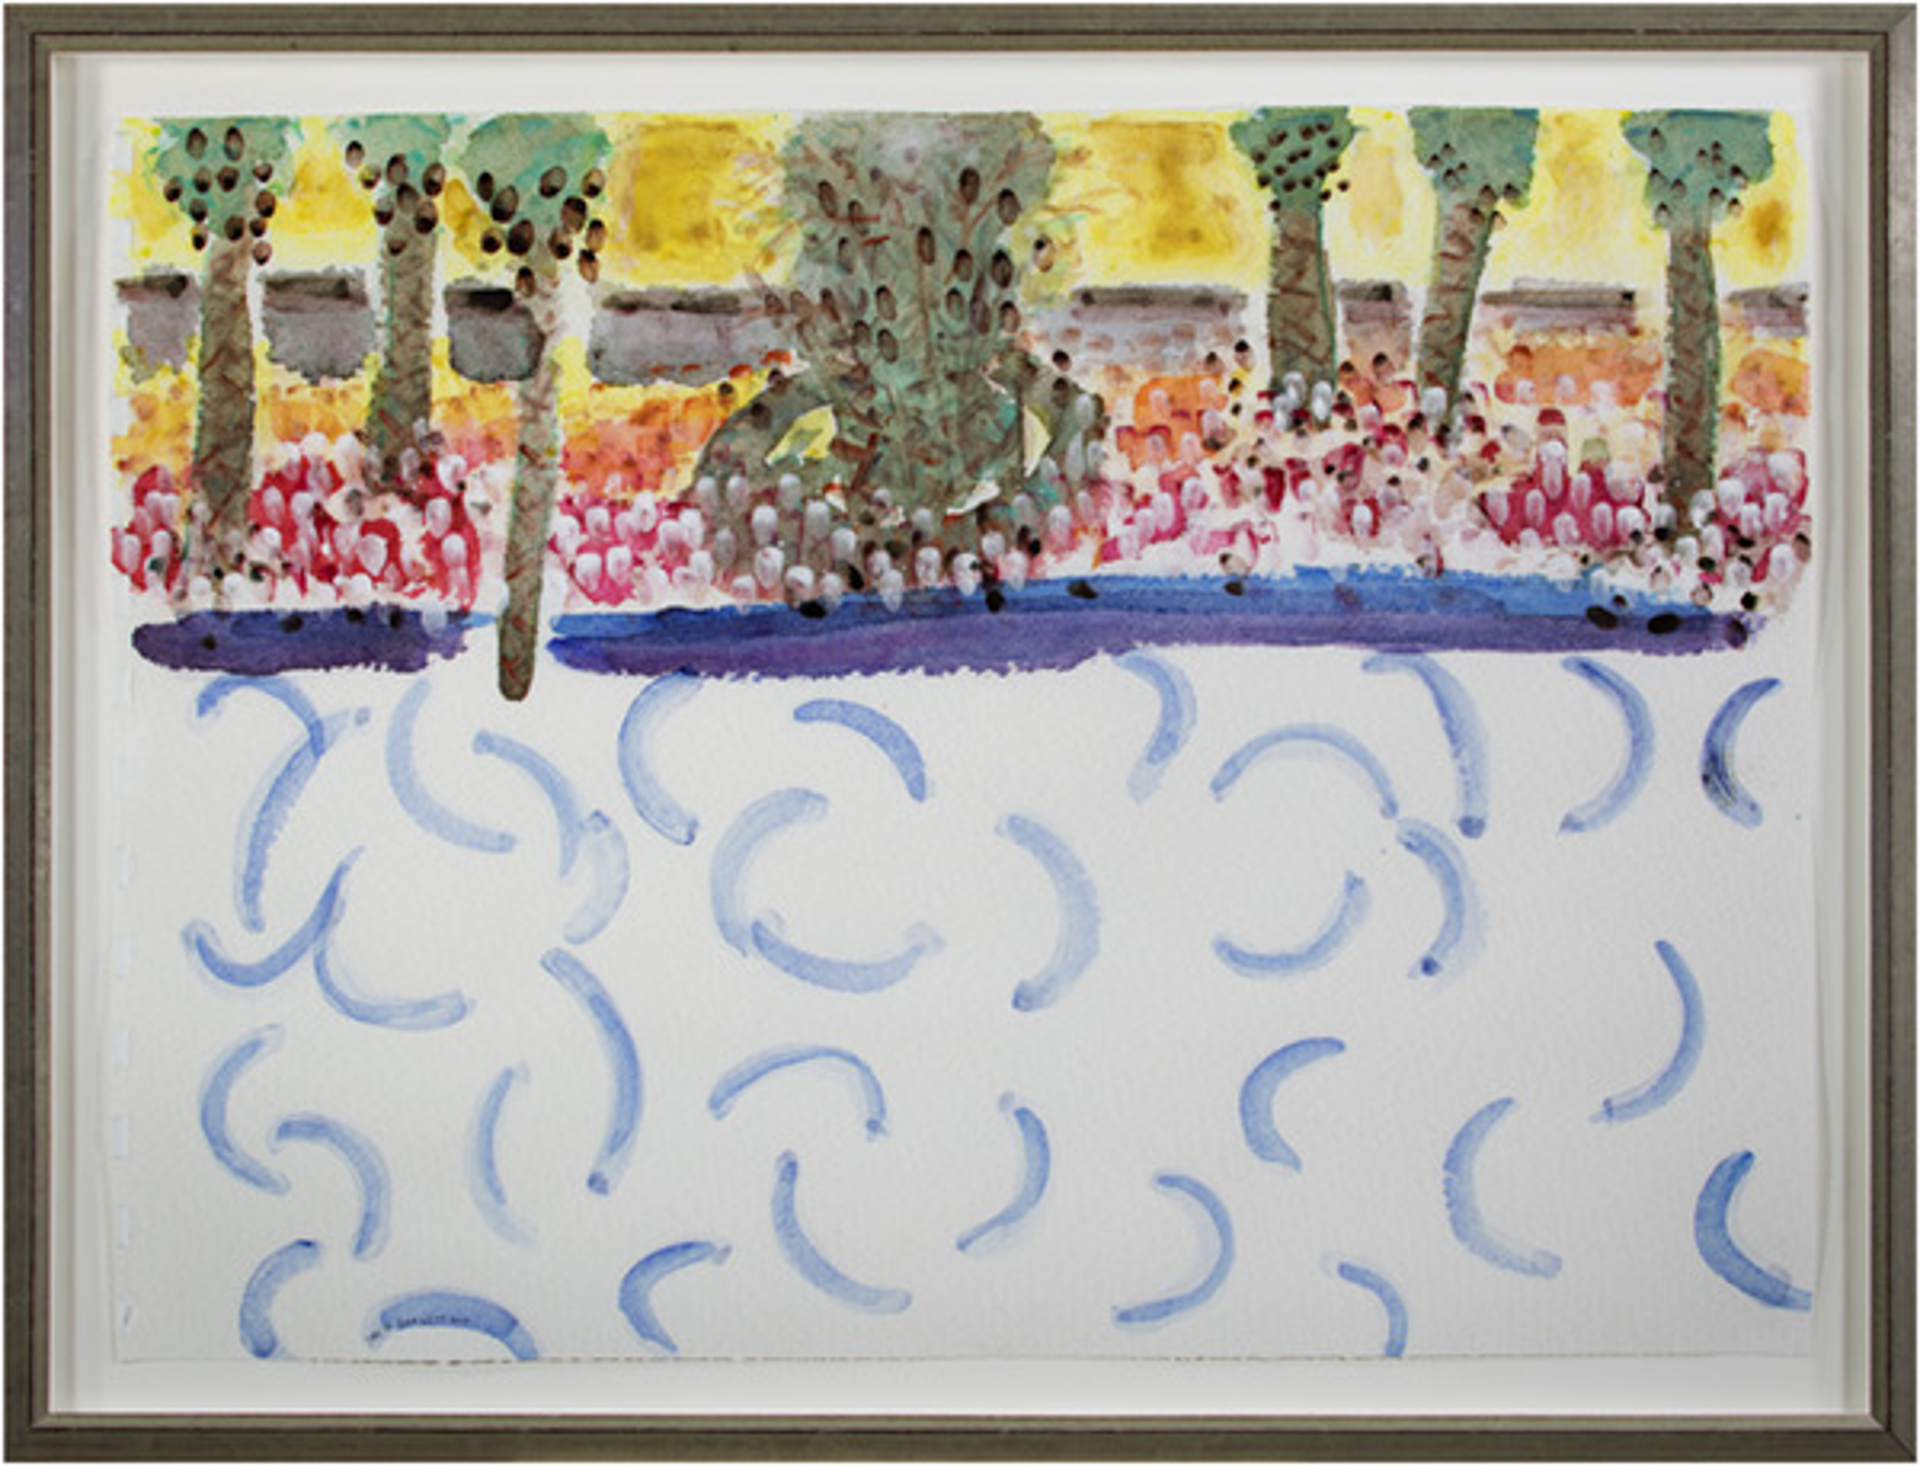 Homage to David Hockney - Sun & Water Spots on My Glasses by the Pool by David Barnett